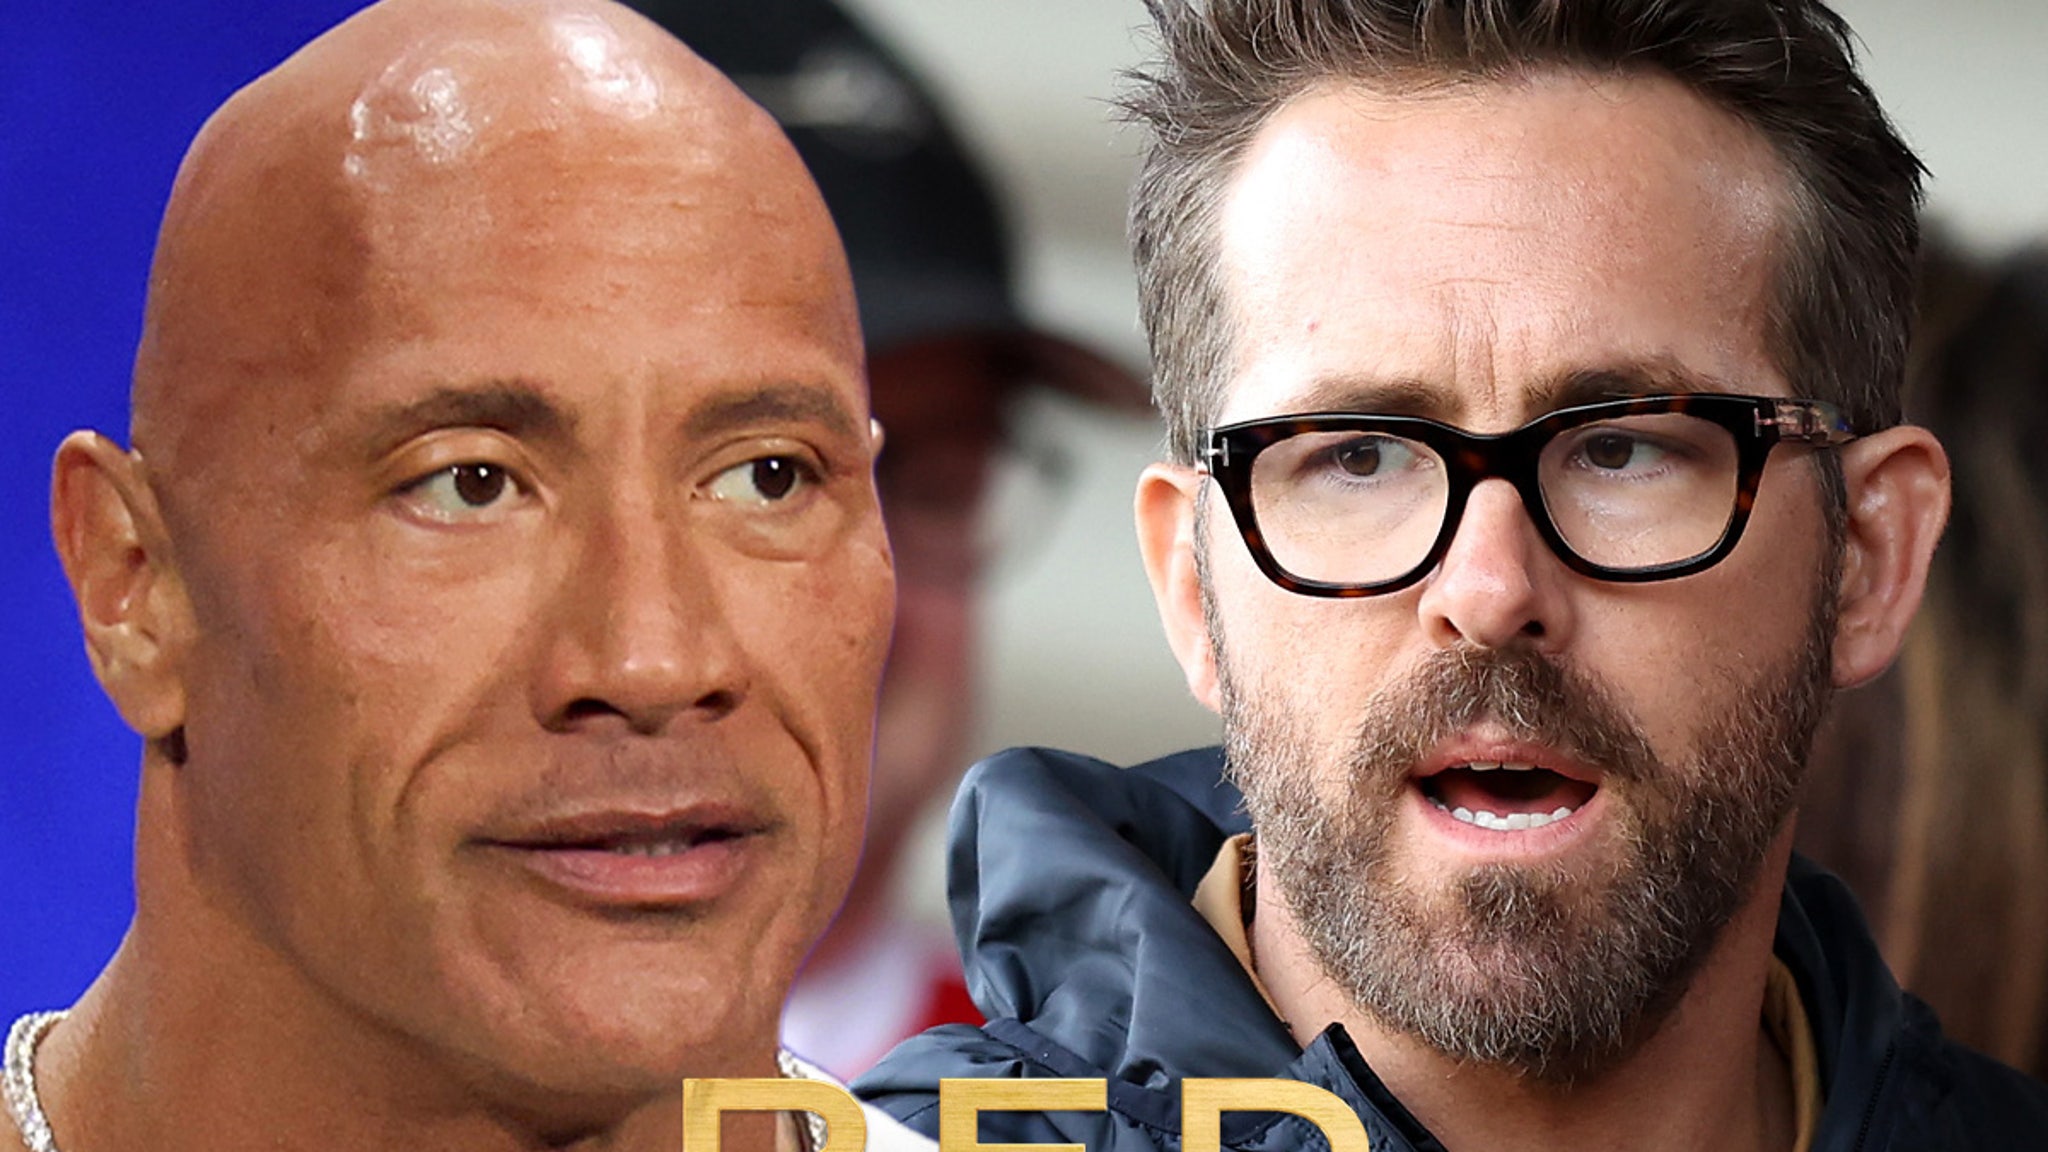 The Rock & Ryan Reynolds Butted Heads on 'Red Notice,' Tardiness to Blame